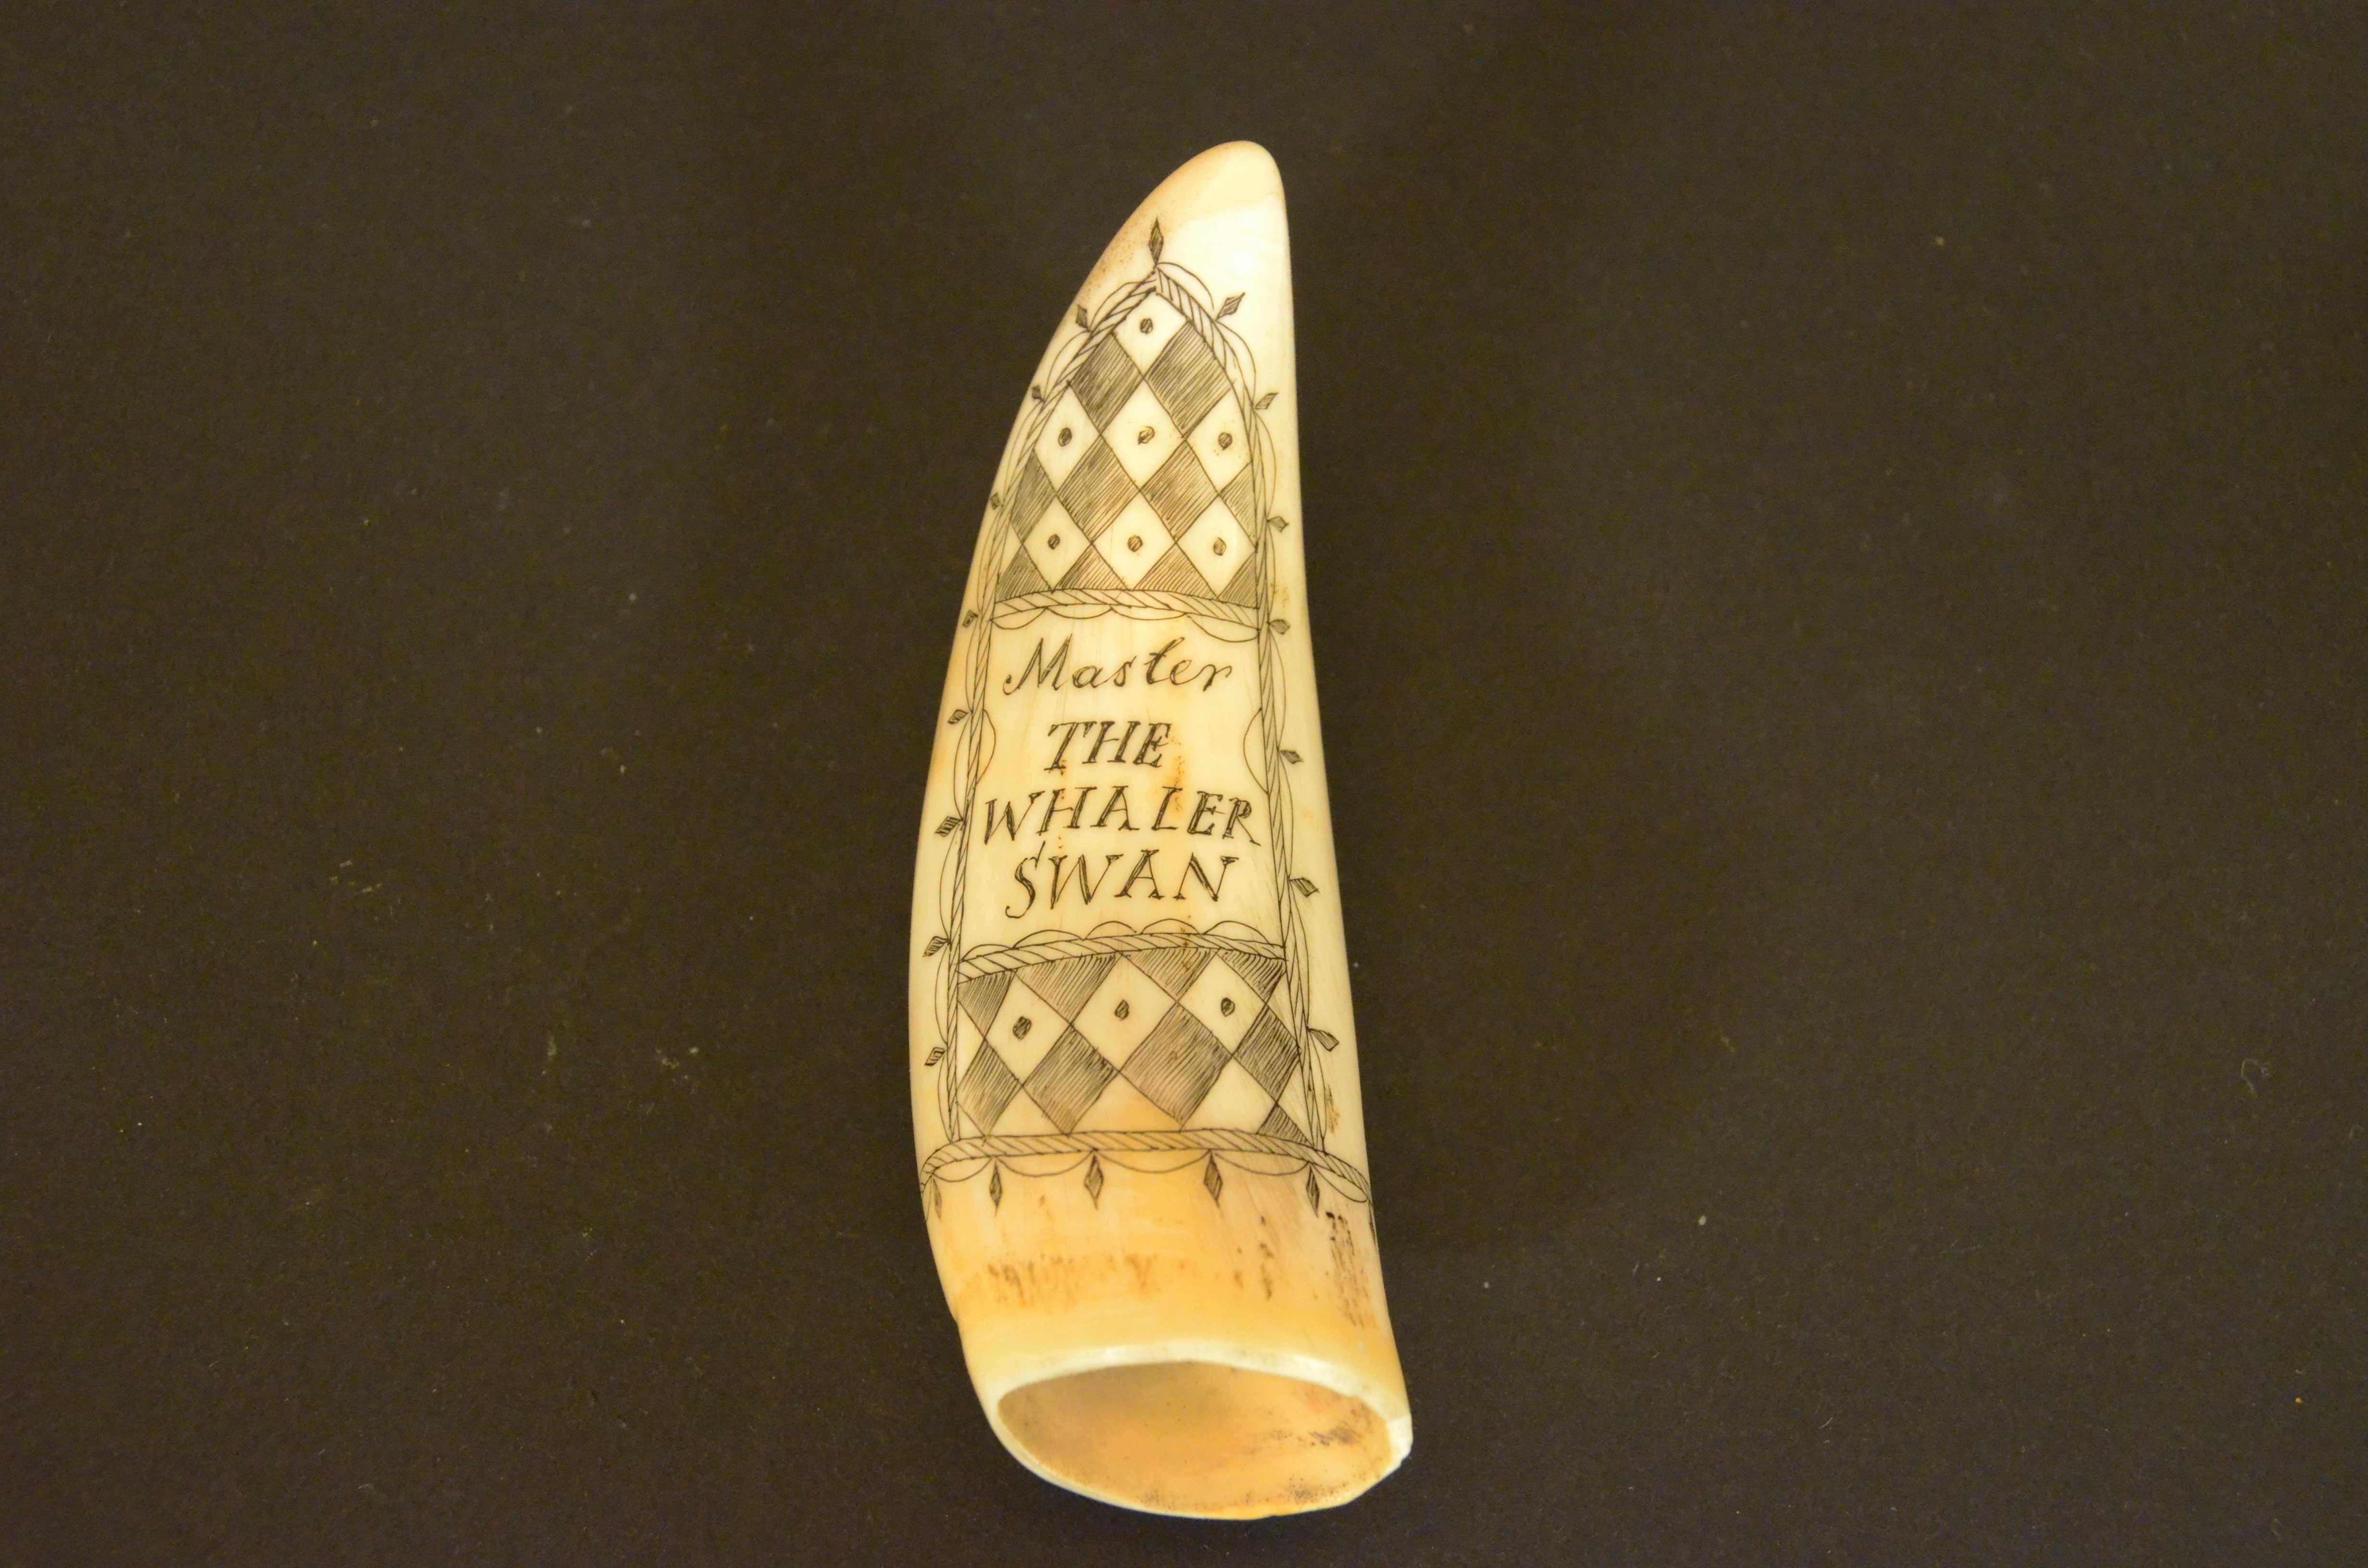 Scrimshaw of an engraved whale tooth, depicting on one side the half-bust of the smartly dressed and handsome Captain F. Swain. On the Back  the inscription Master  The WHALER SWAN framed by a rich cartouche. Datable to around the mid-19th